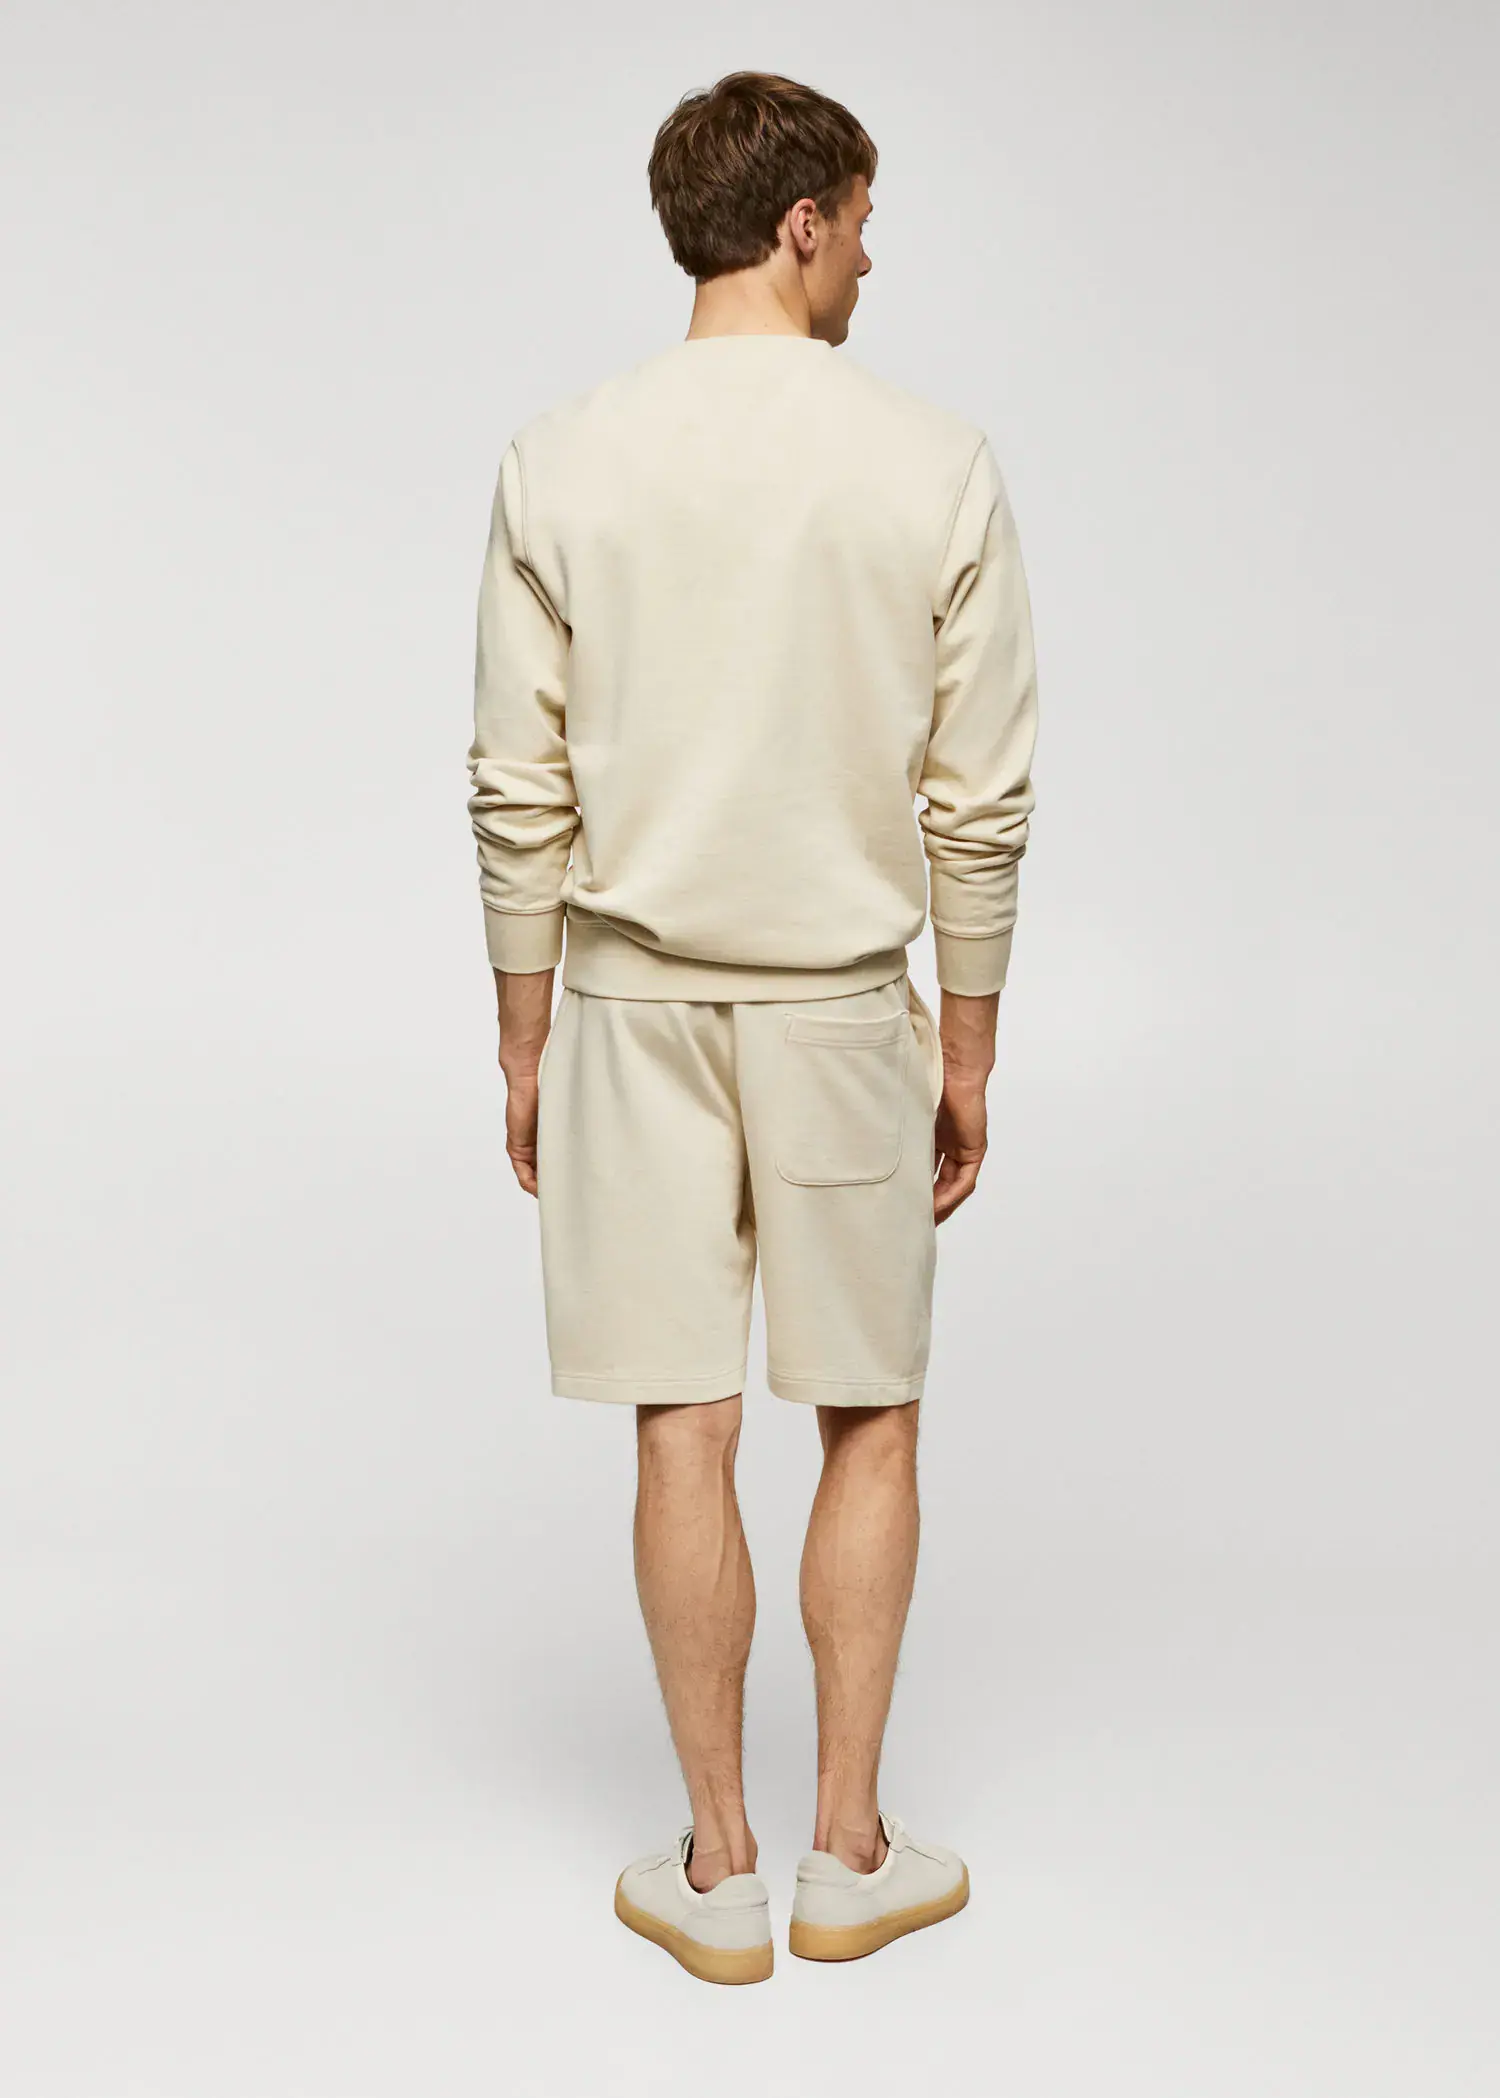 Mango 100% cotton basic sweatshirt . a man in a beige outfit stands in front of a white wall. 